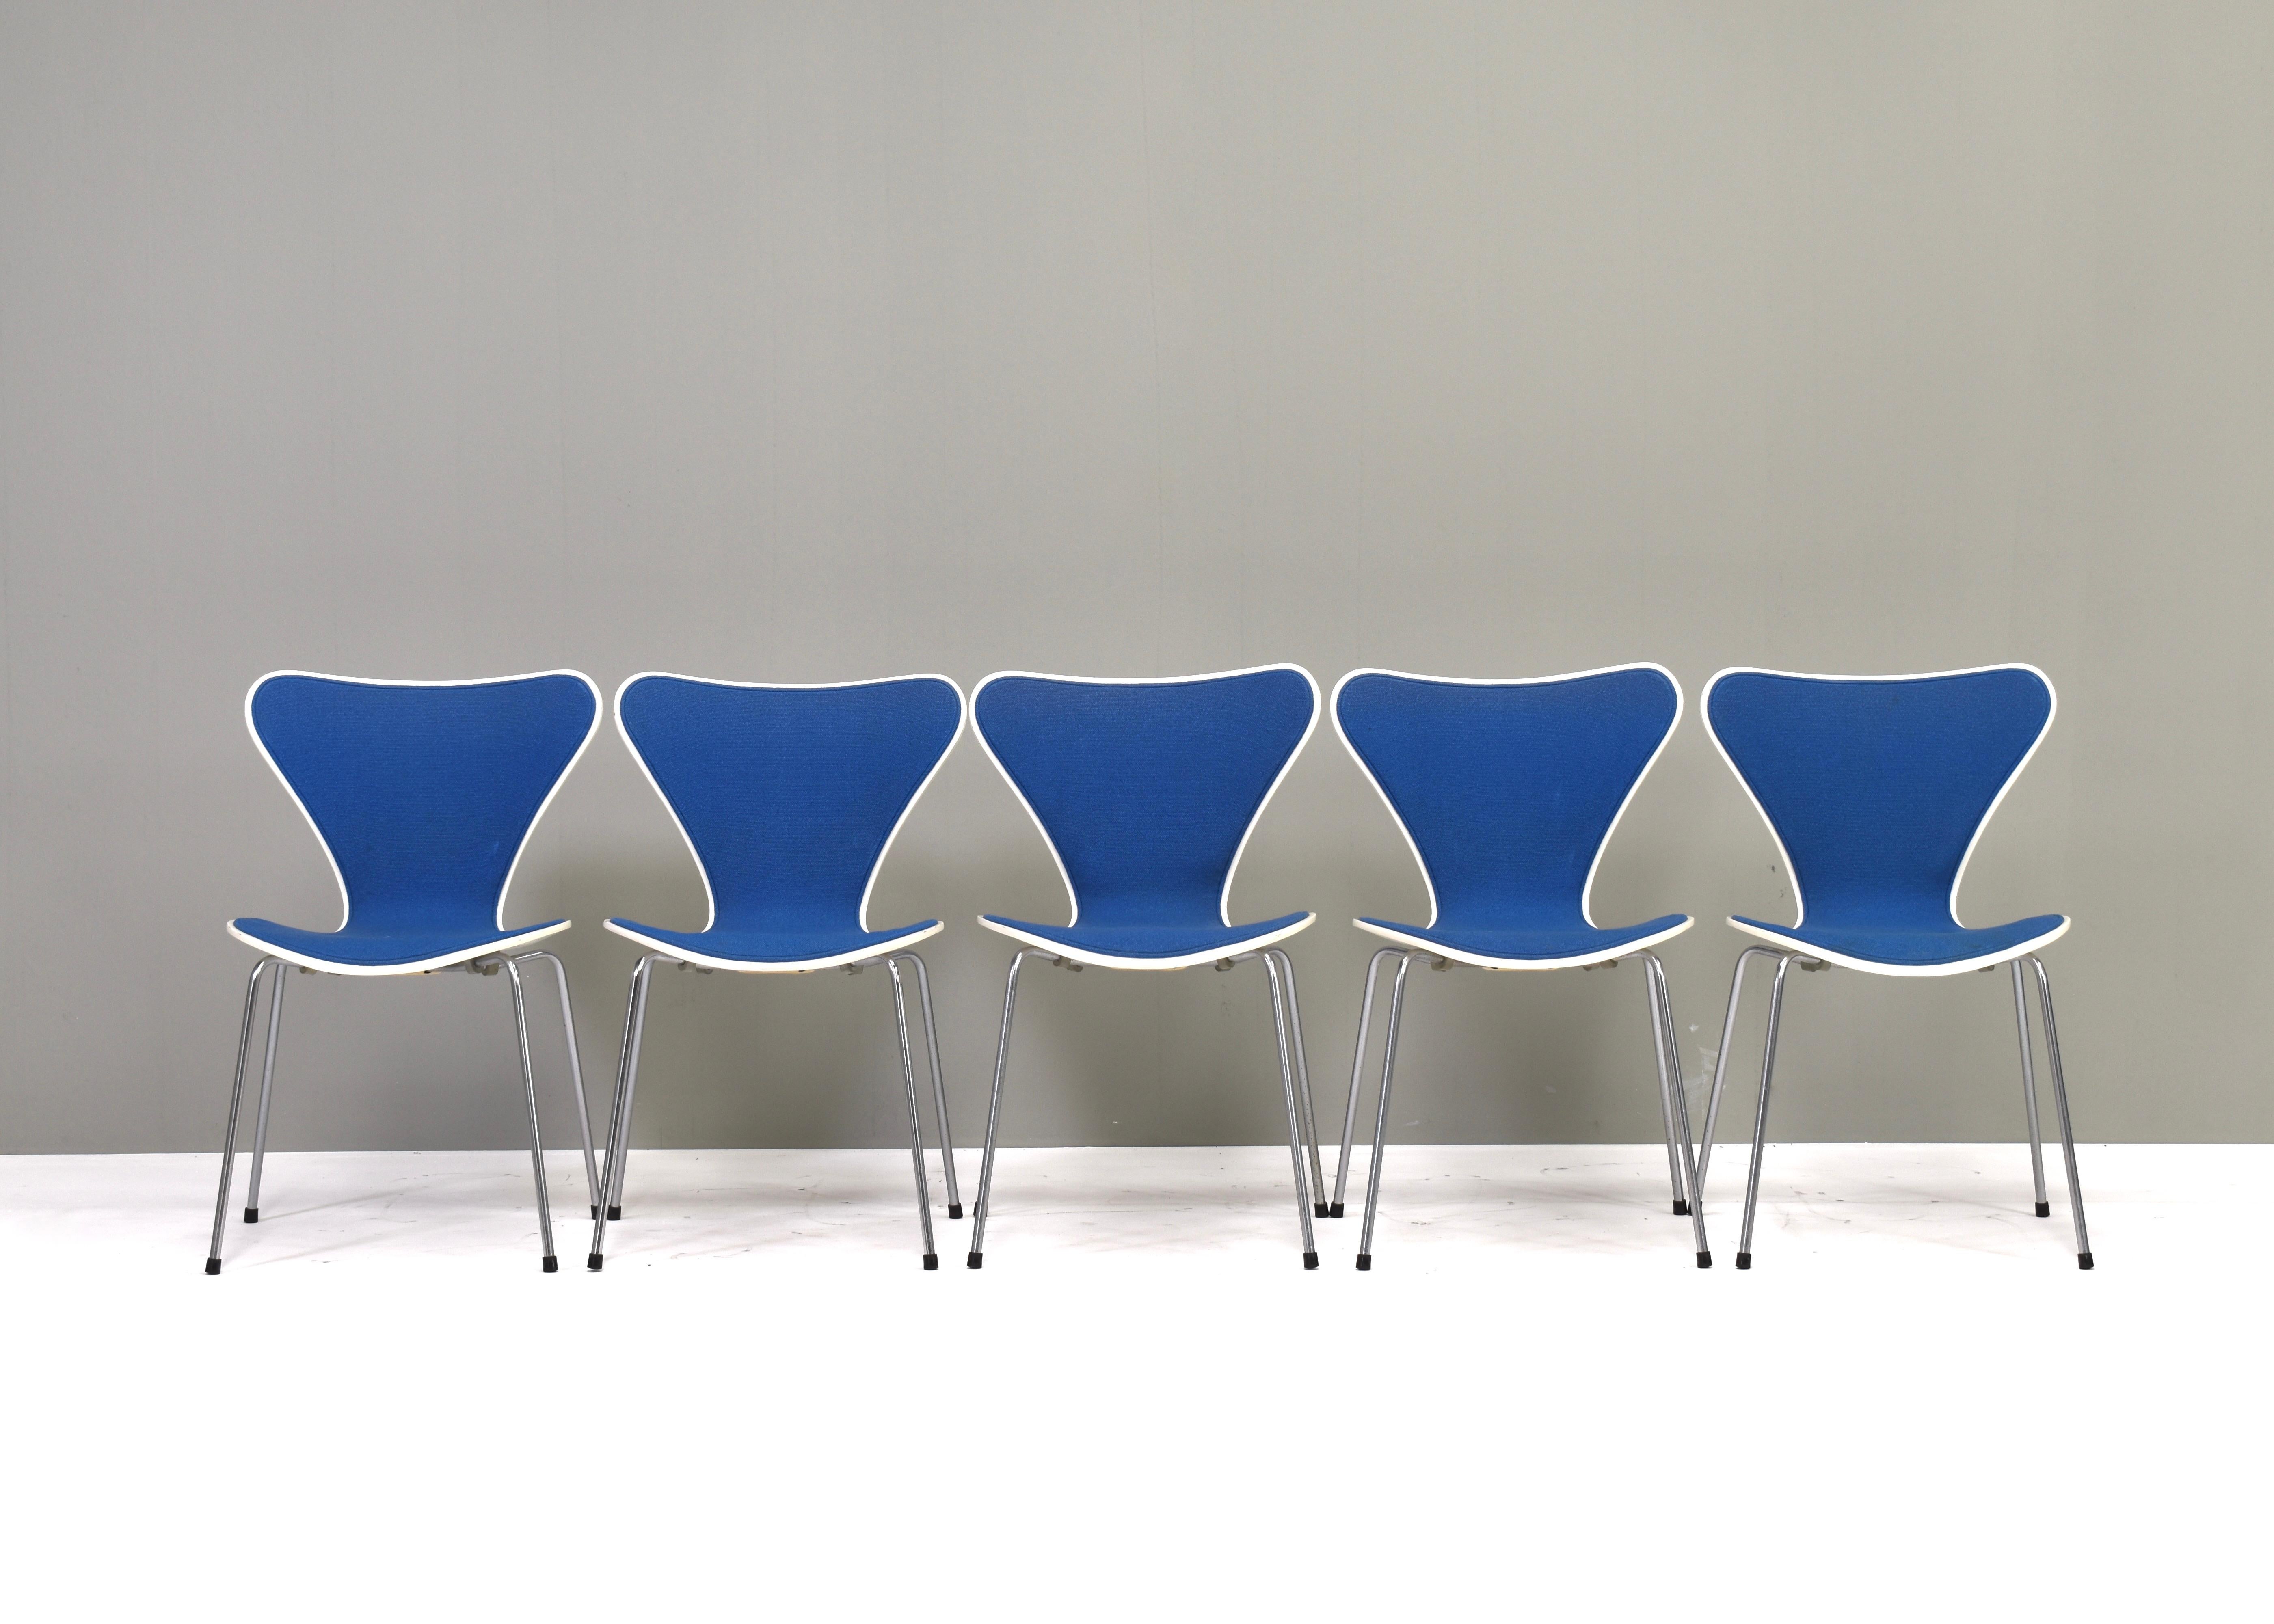 Set of five butterfly chairs by Arne Jacobsen for Fritz Hansen – Denmark, produced in 1979. Chrome base, white lacquer plywood and blue Kvadrat fabric.
Designer: Arne Jacobsen
Manufacturer: Fritz Hansen [labeled] Country: Denmark
Model: 3107